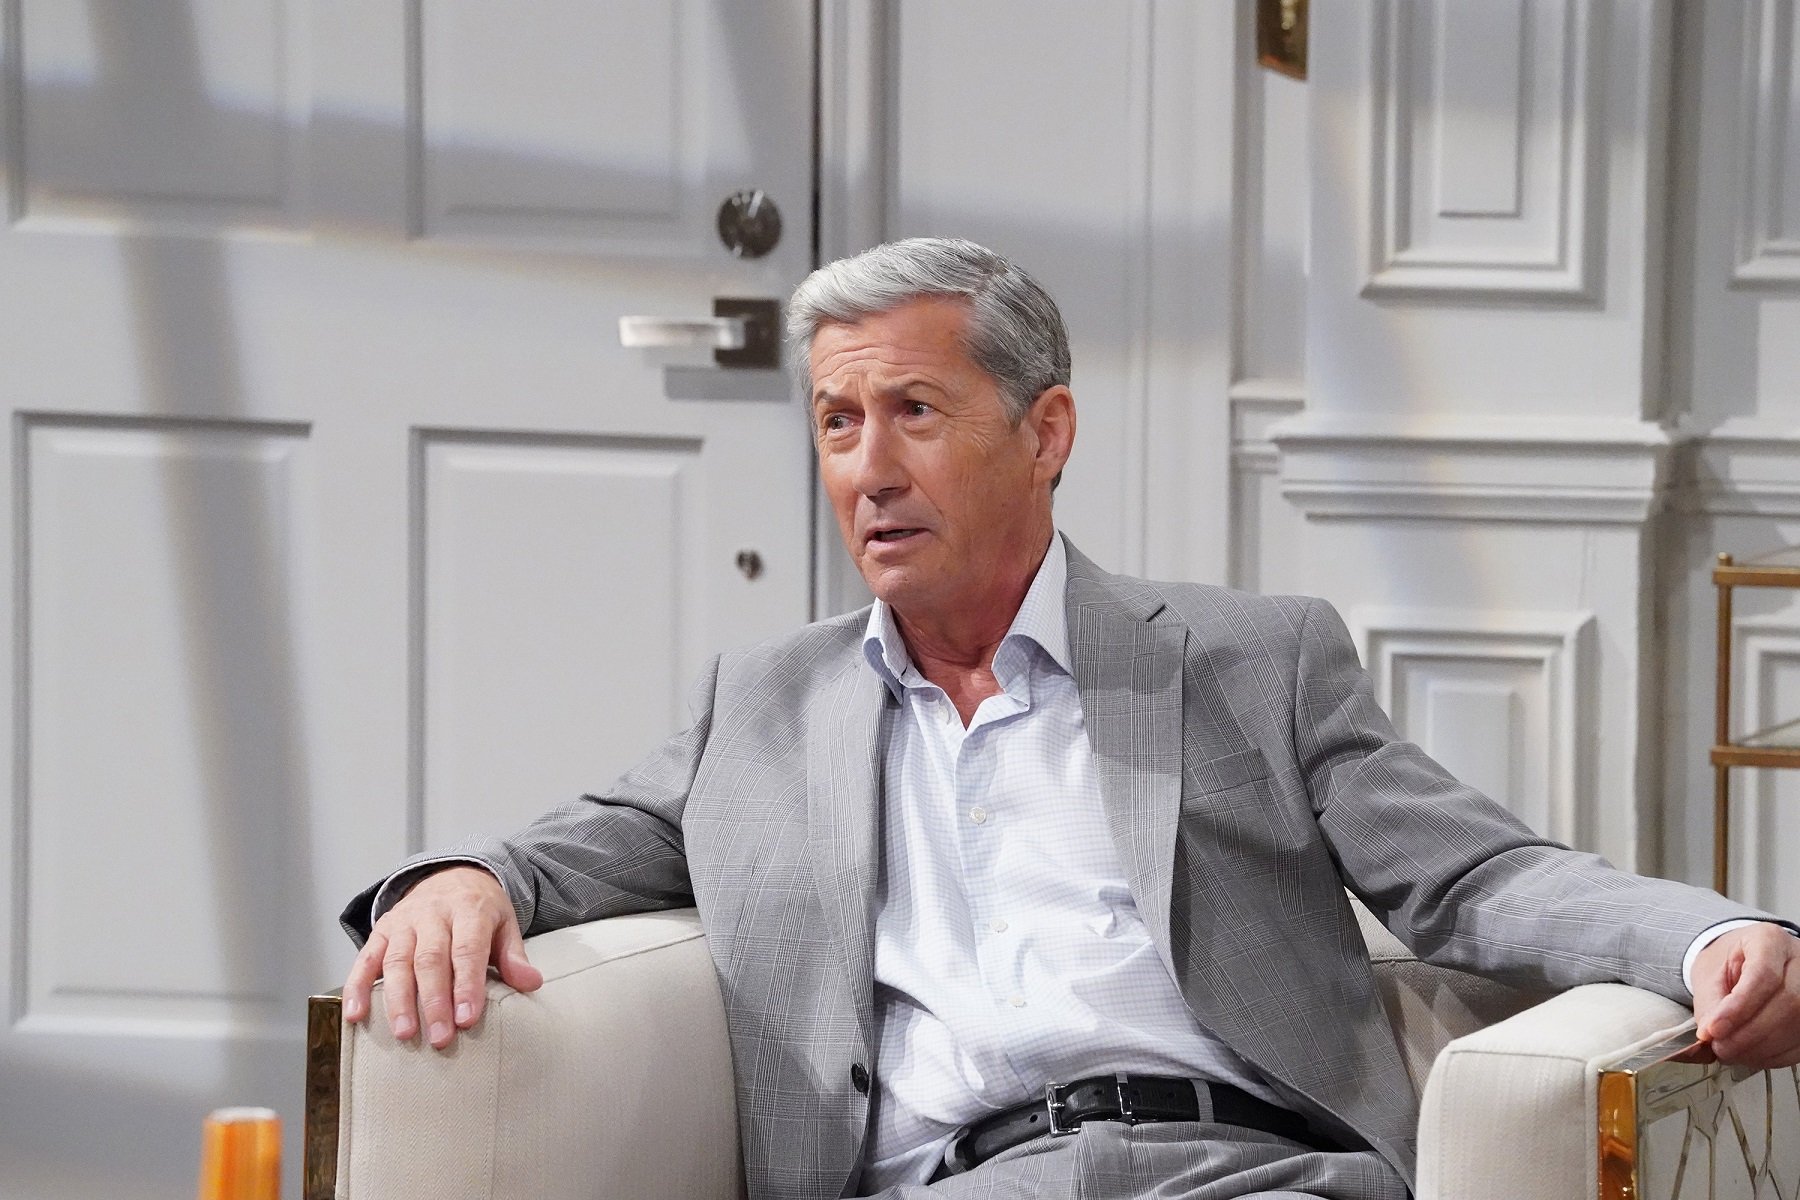 ‘General Hospital’ This Week: Victor Makes Threats He Promises to Keep